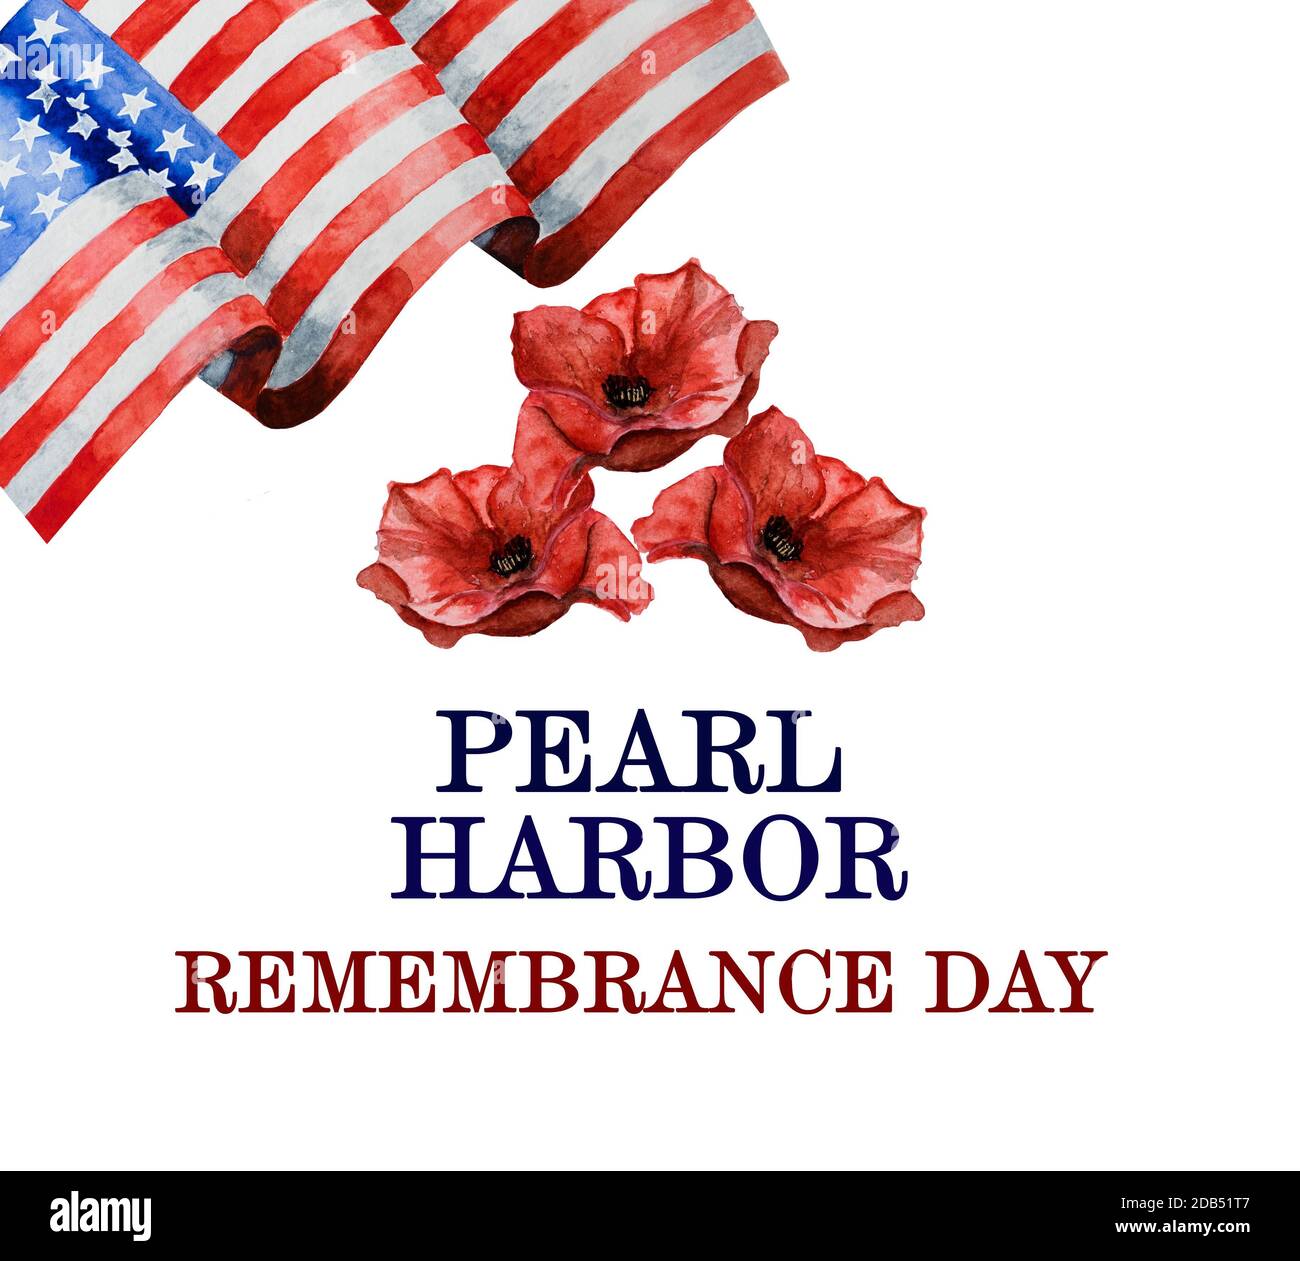 pearl harbor day remembrance 2001